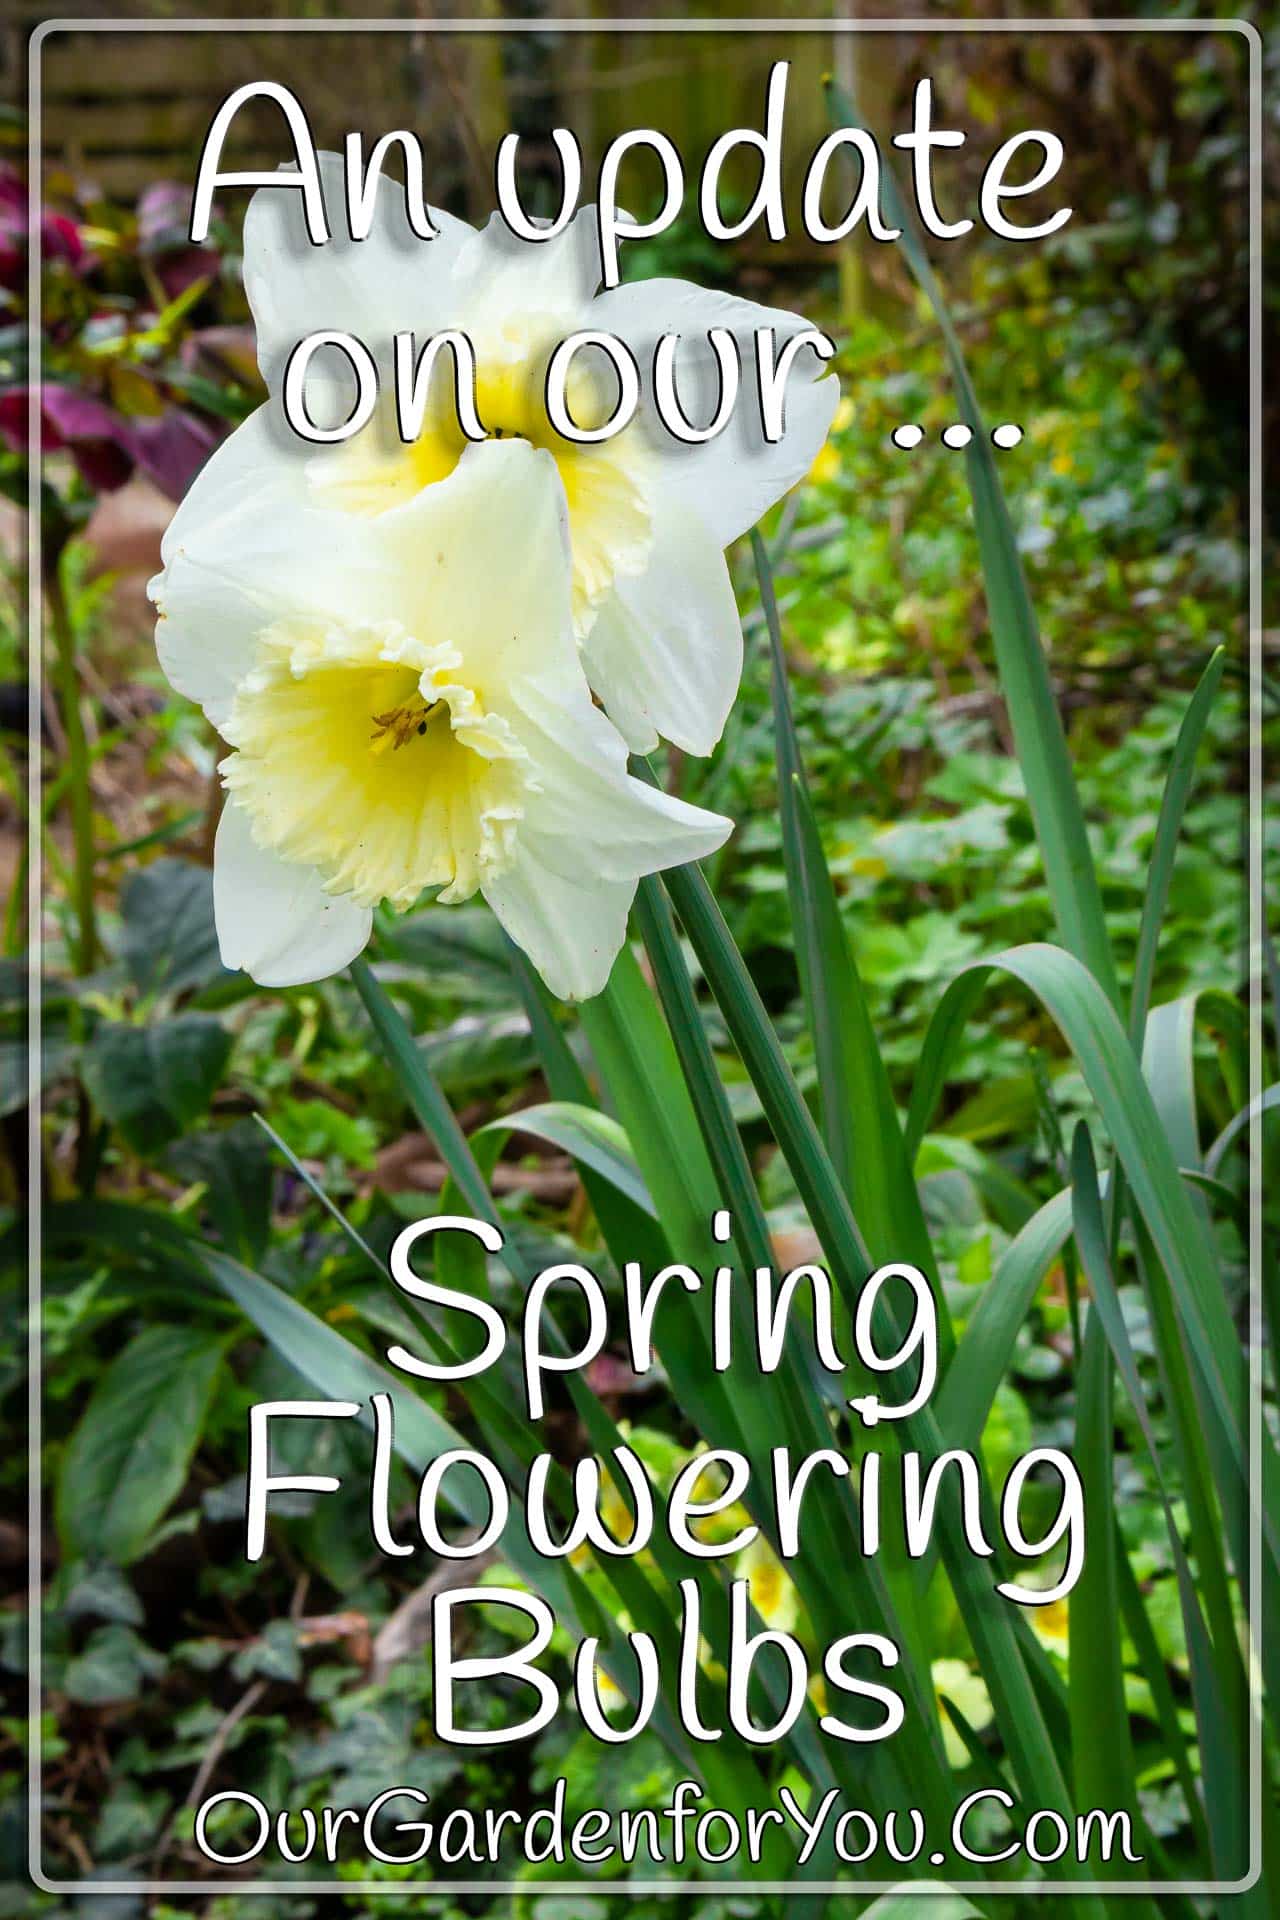 The pin image to our post - 'An update on our spring flowering bulbs'